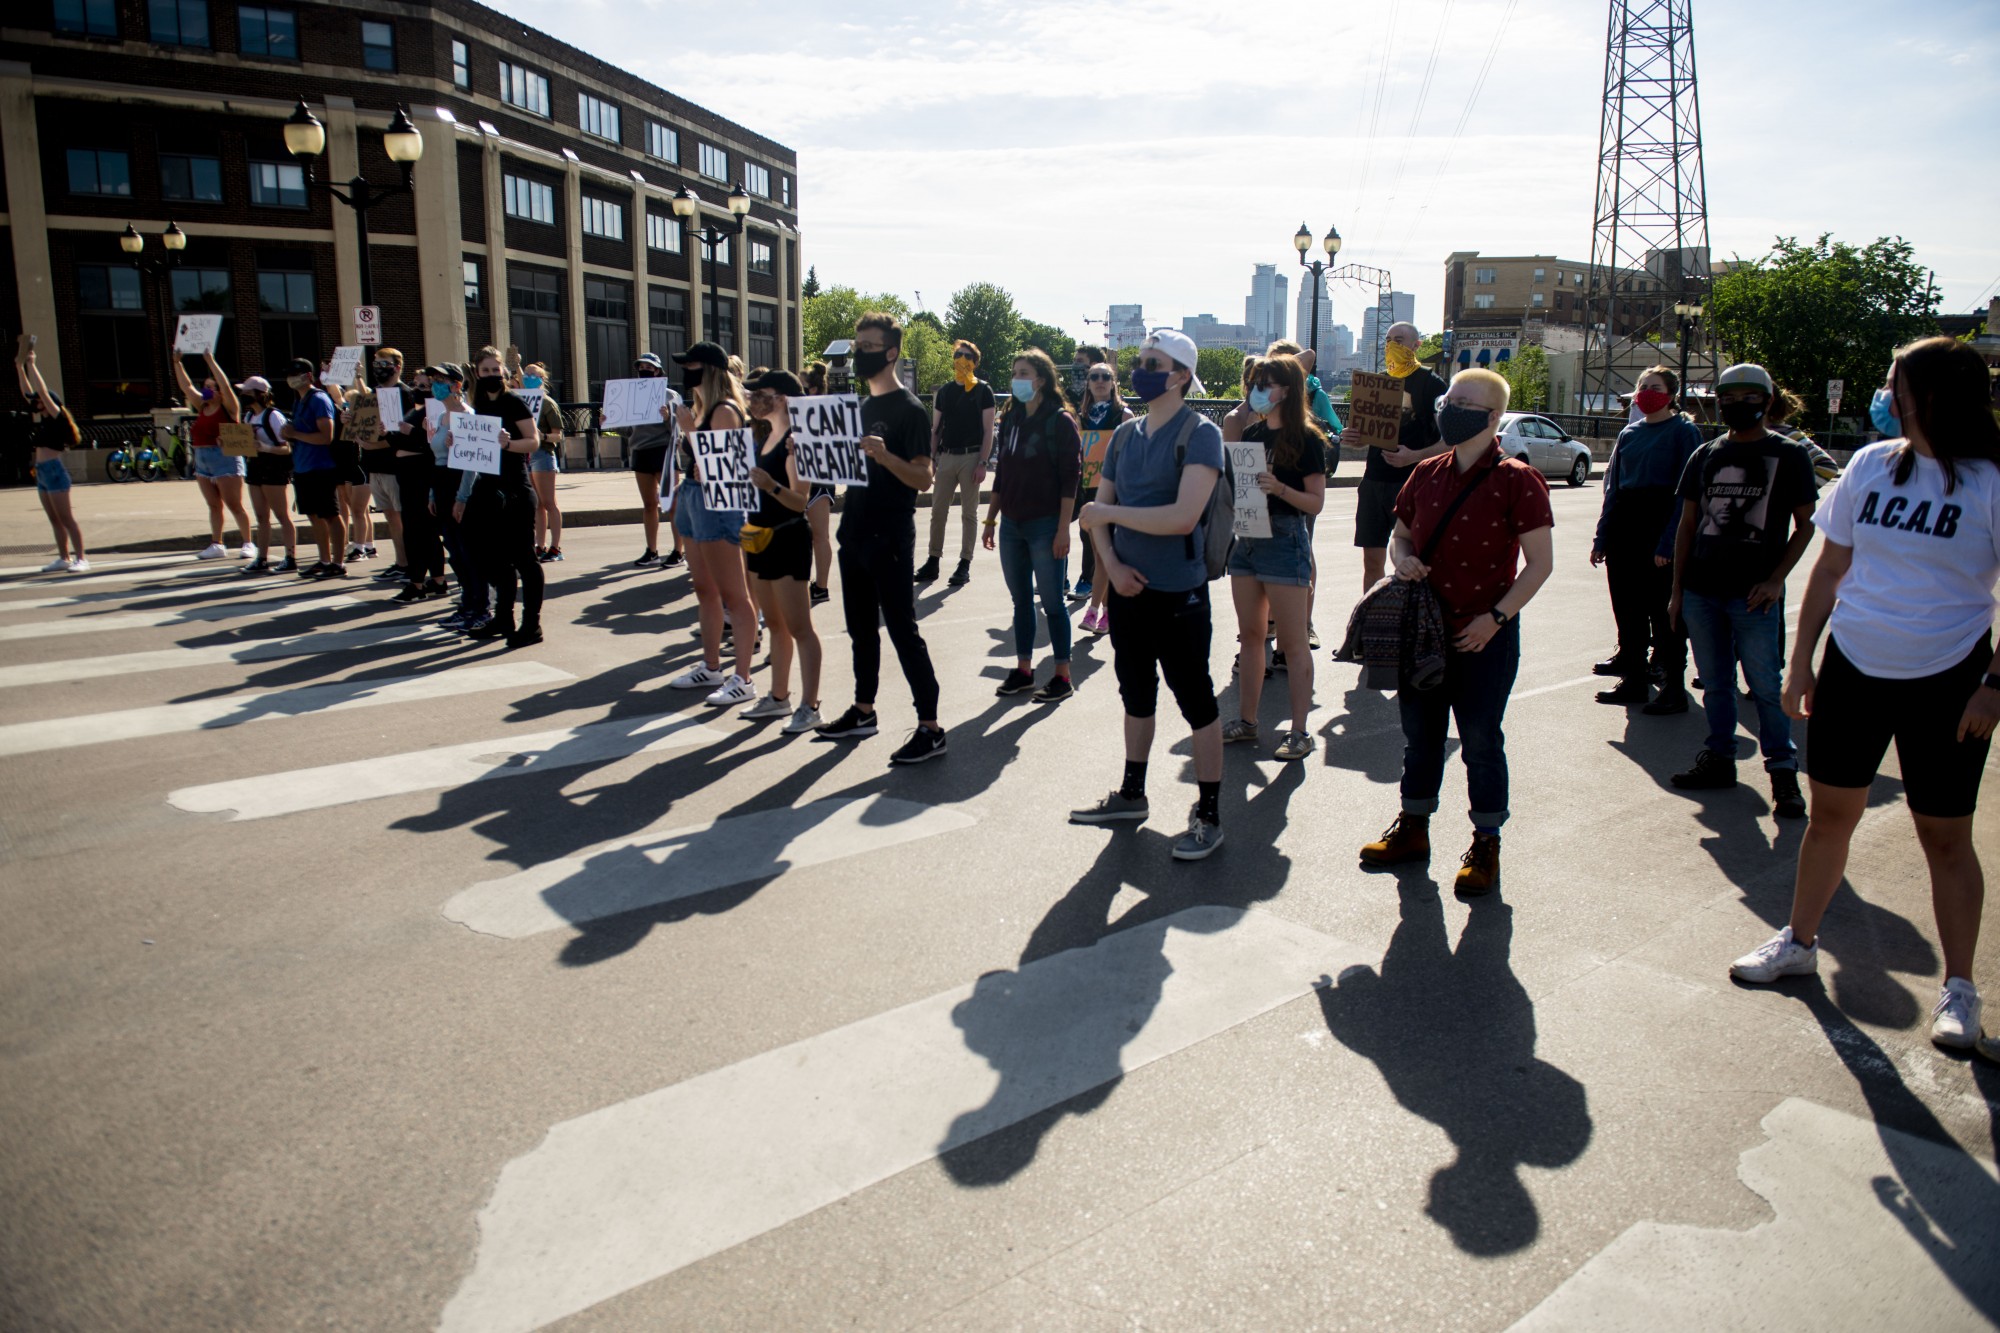 Students protest at the entrance of Dinkytown, blocking traffic from passing through on Southeast 4th Street on Sunday, May 31. Cars passing by frequently honked in support of the crowd.